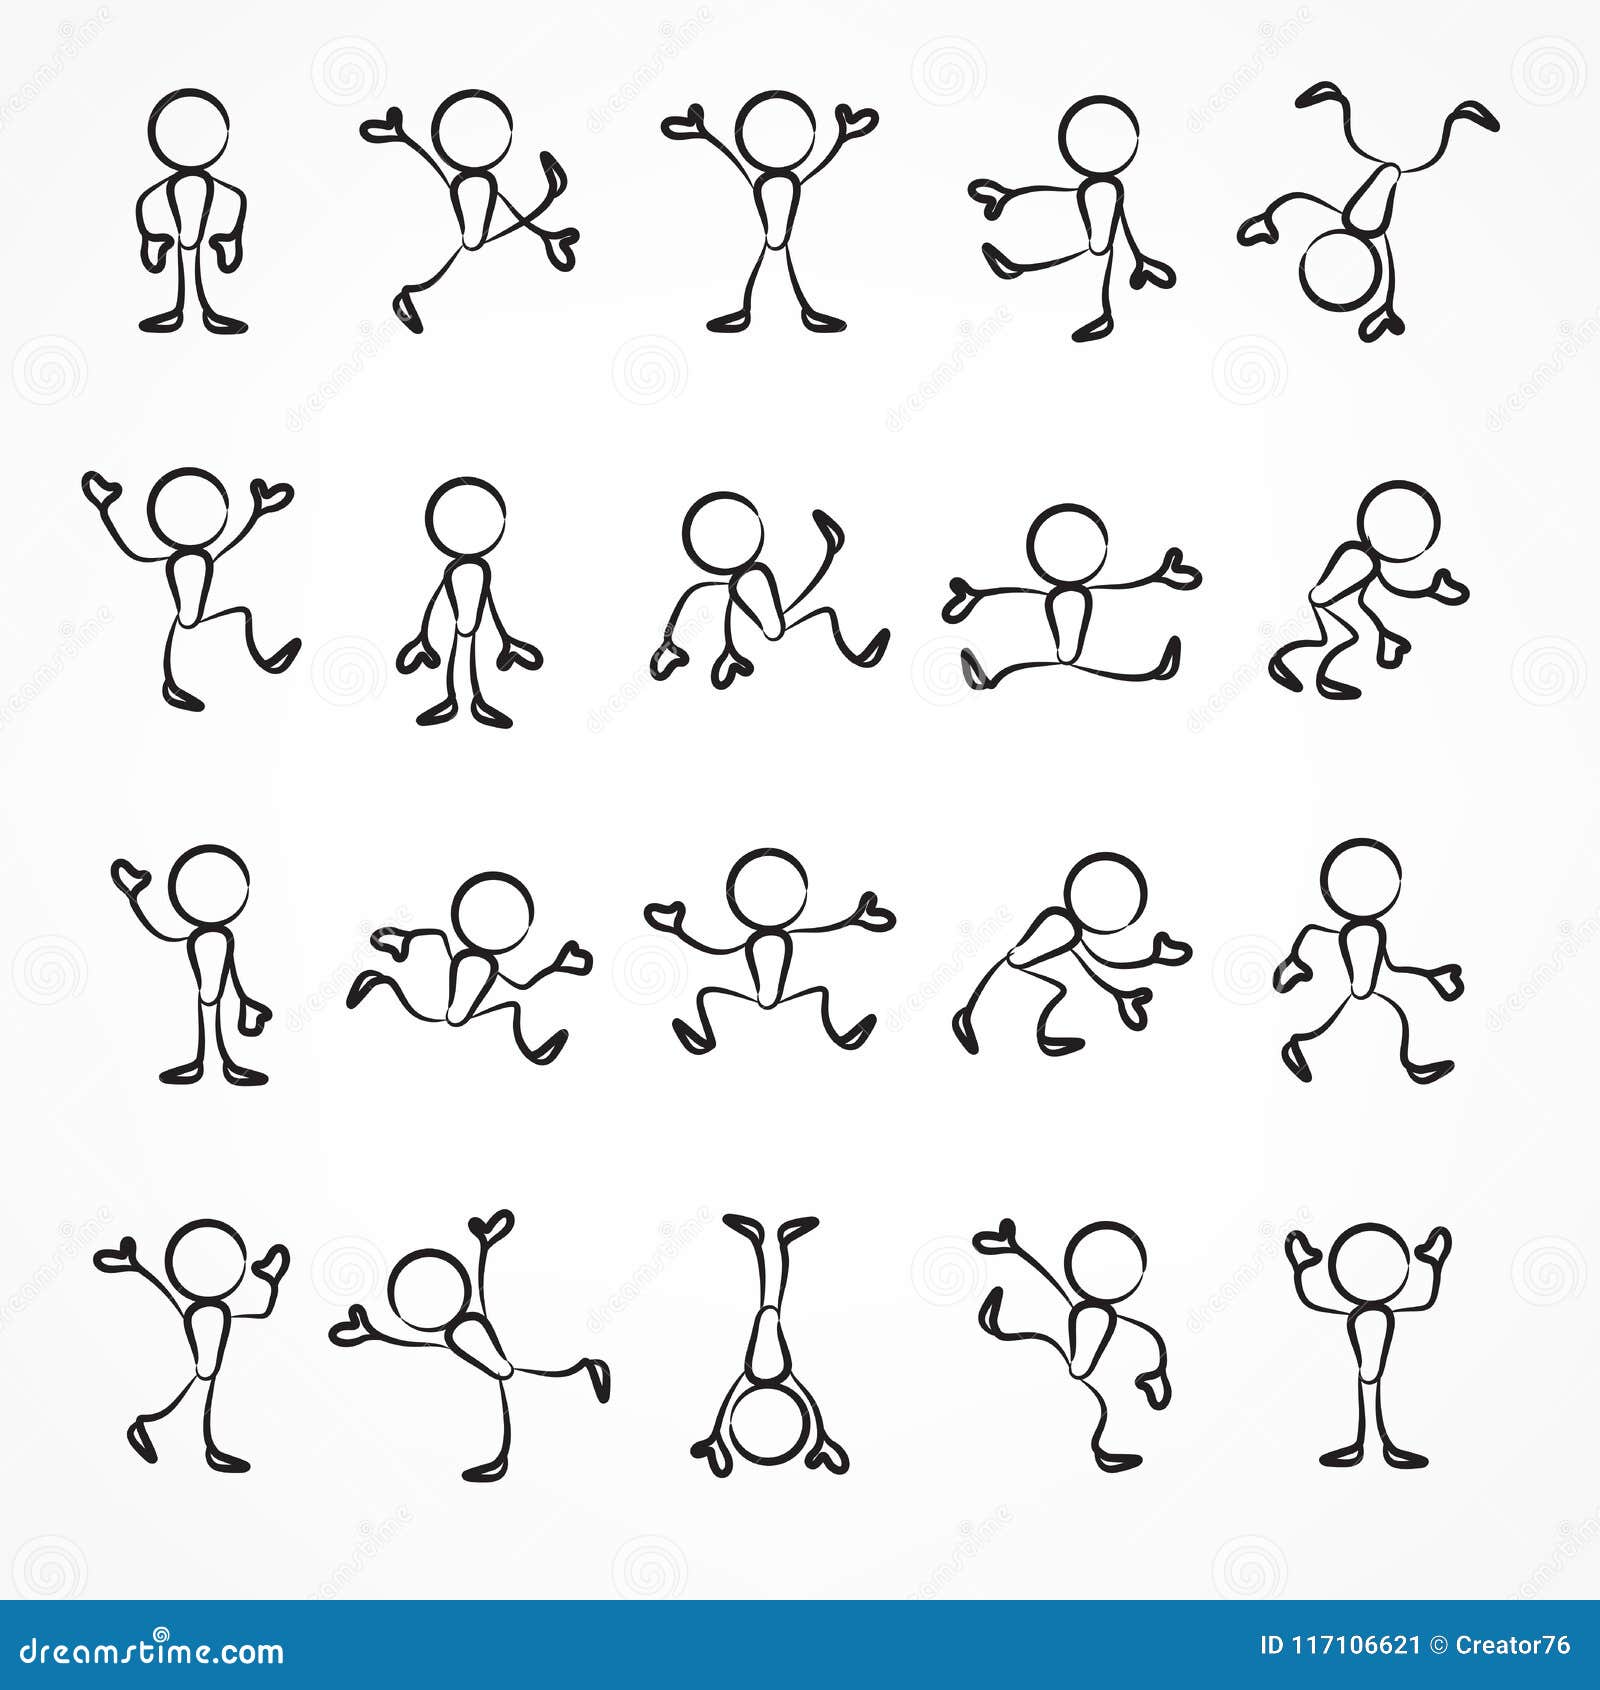 Human Action Poses Stick Figure Pictogram Stock Vector (Royalty Free)  325861250 | Shutterstock